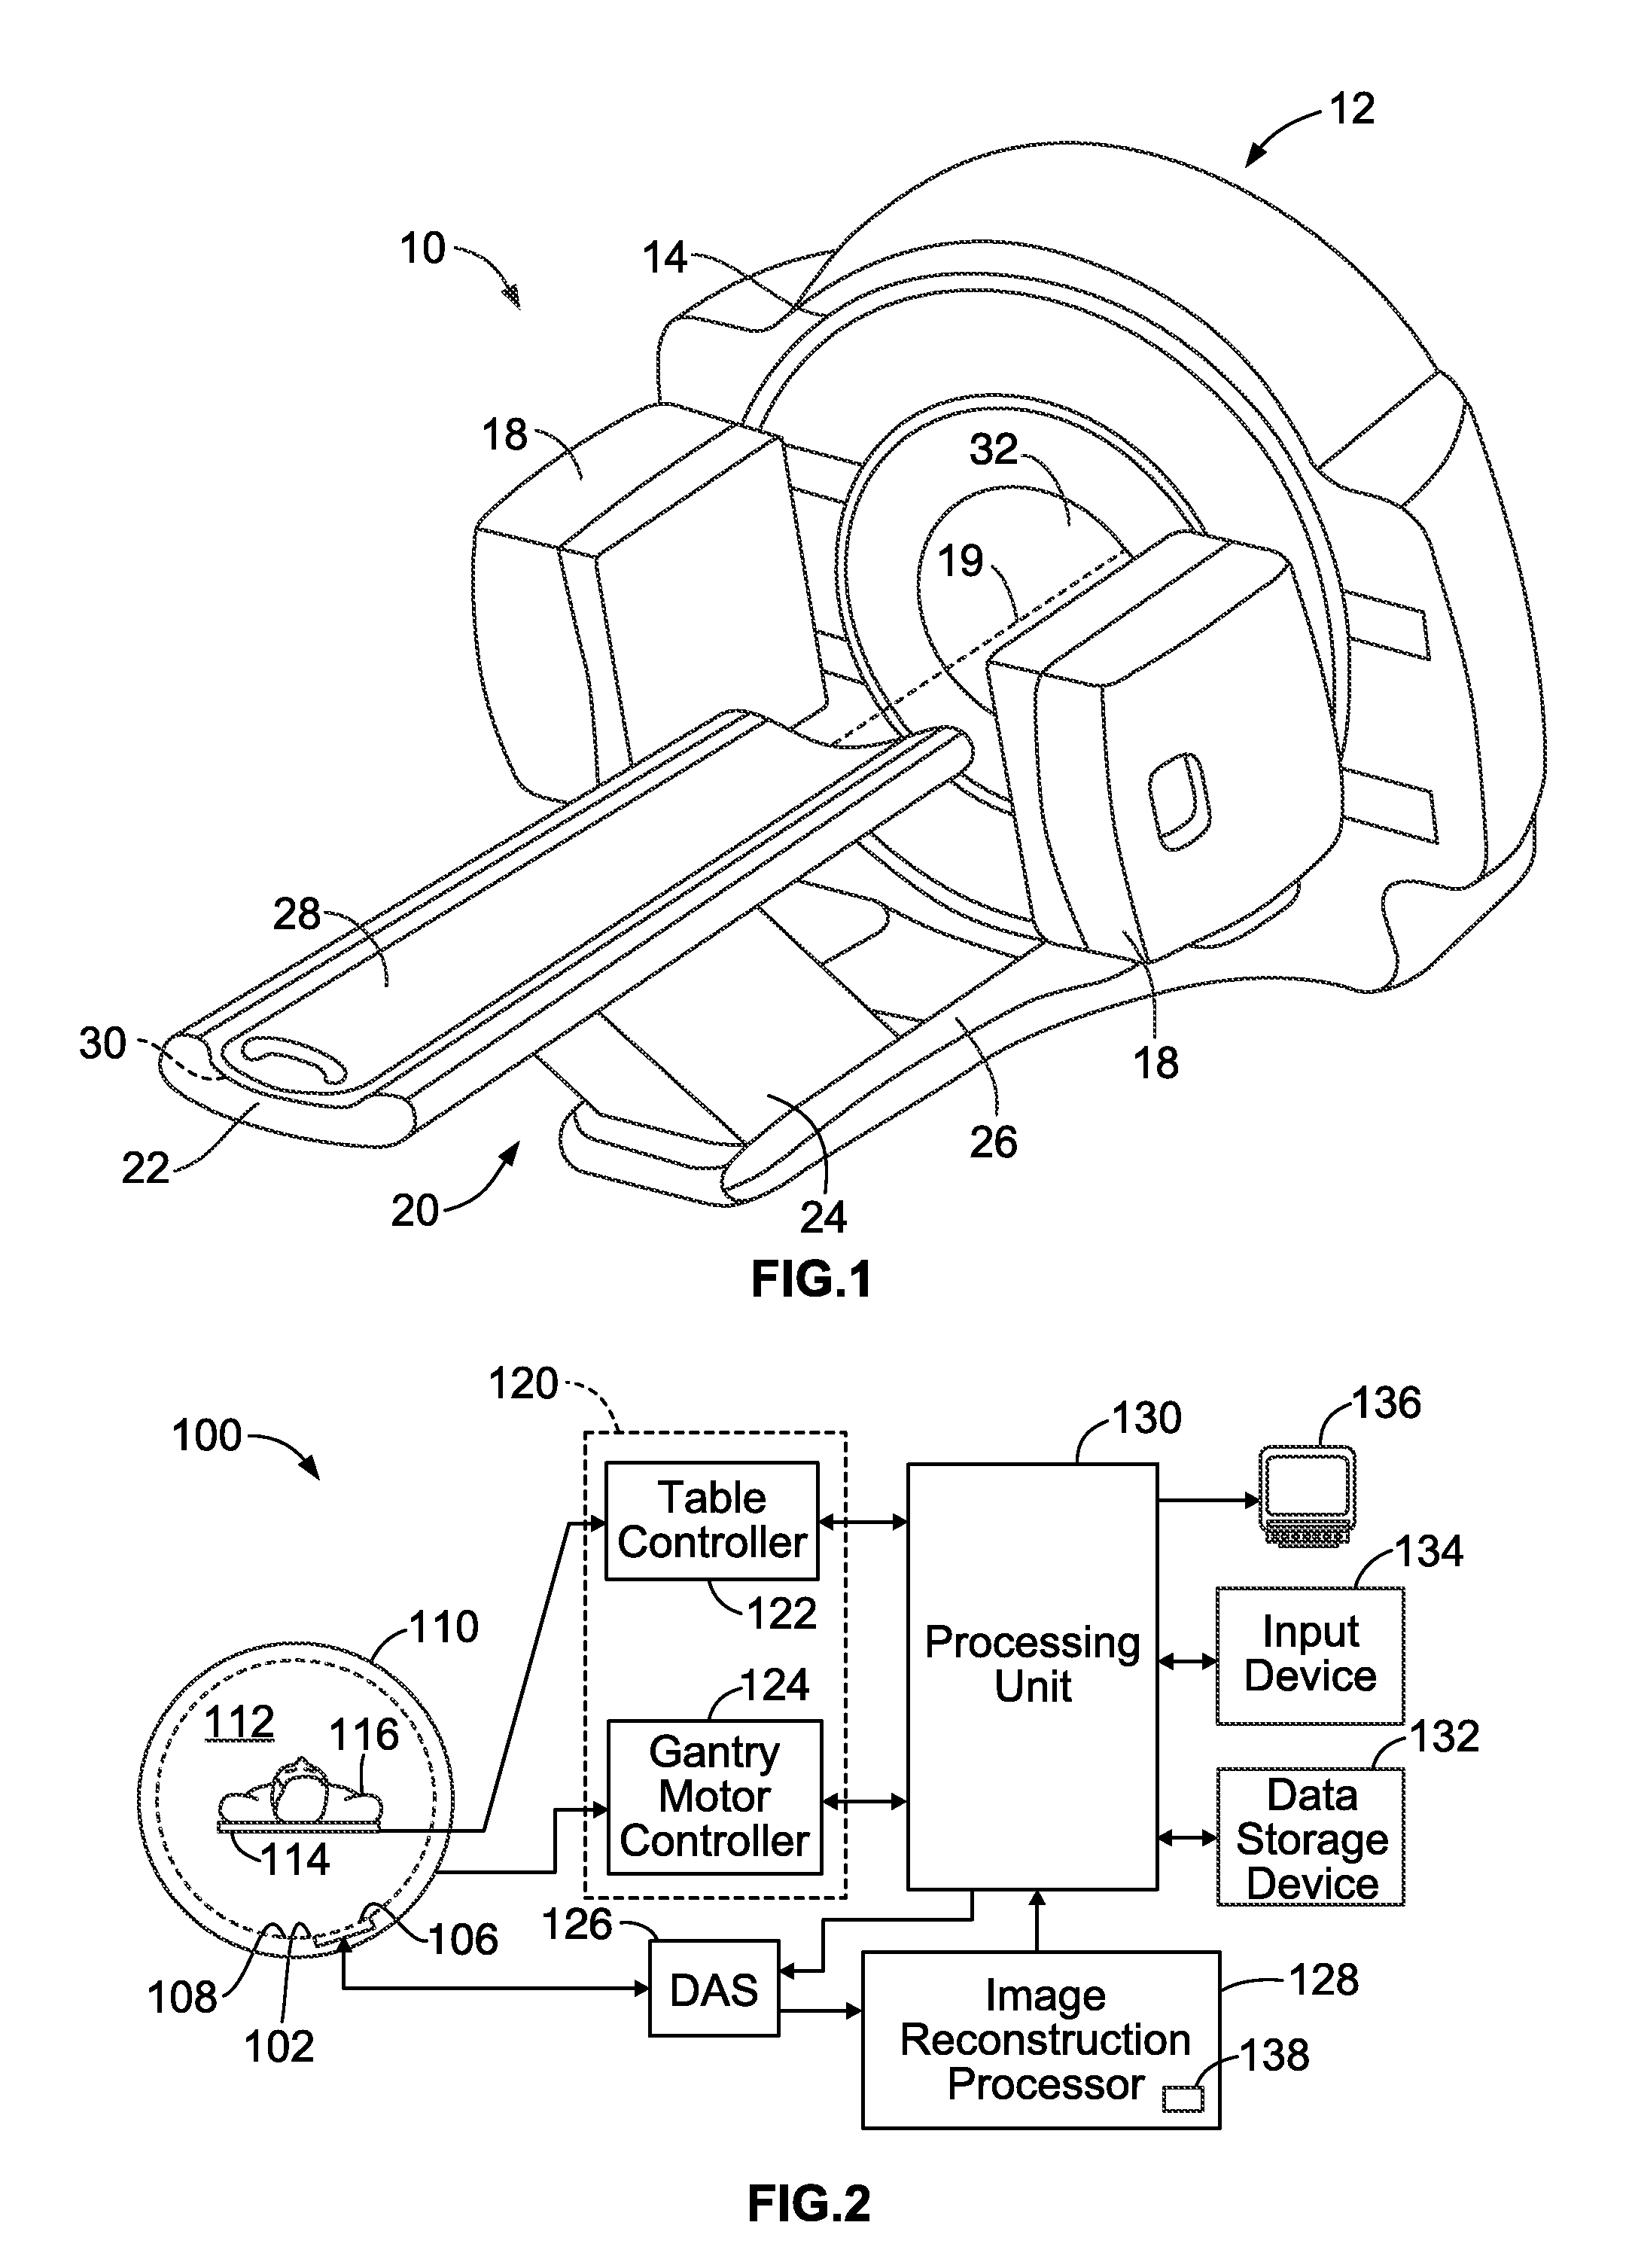 Apparatus and methods for determining a system matrix for pinhole collimator imaging systems